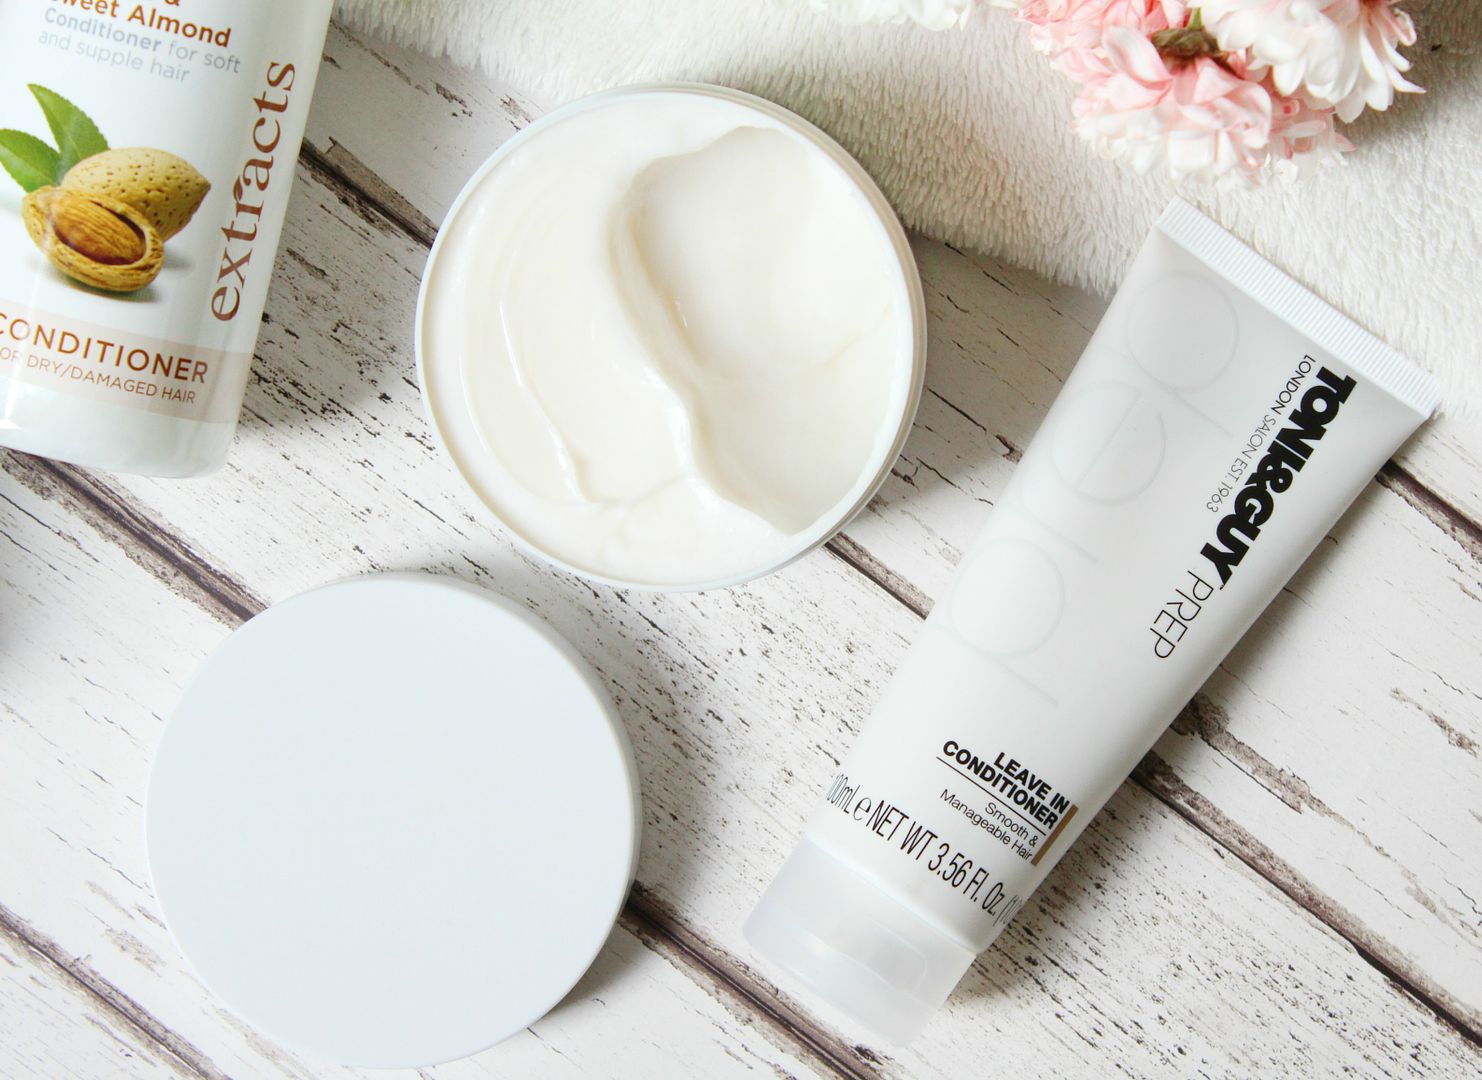 Spring Hair Care Routine Shampoo Conditioner Mask Super Drug Toni And Guy Reconstruction Mask Leave In Conditioner Review Belle-Amie UK Beauty Fashion Lifestyle Blog